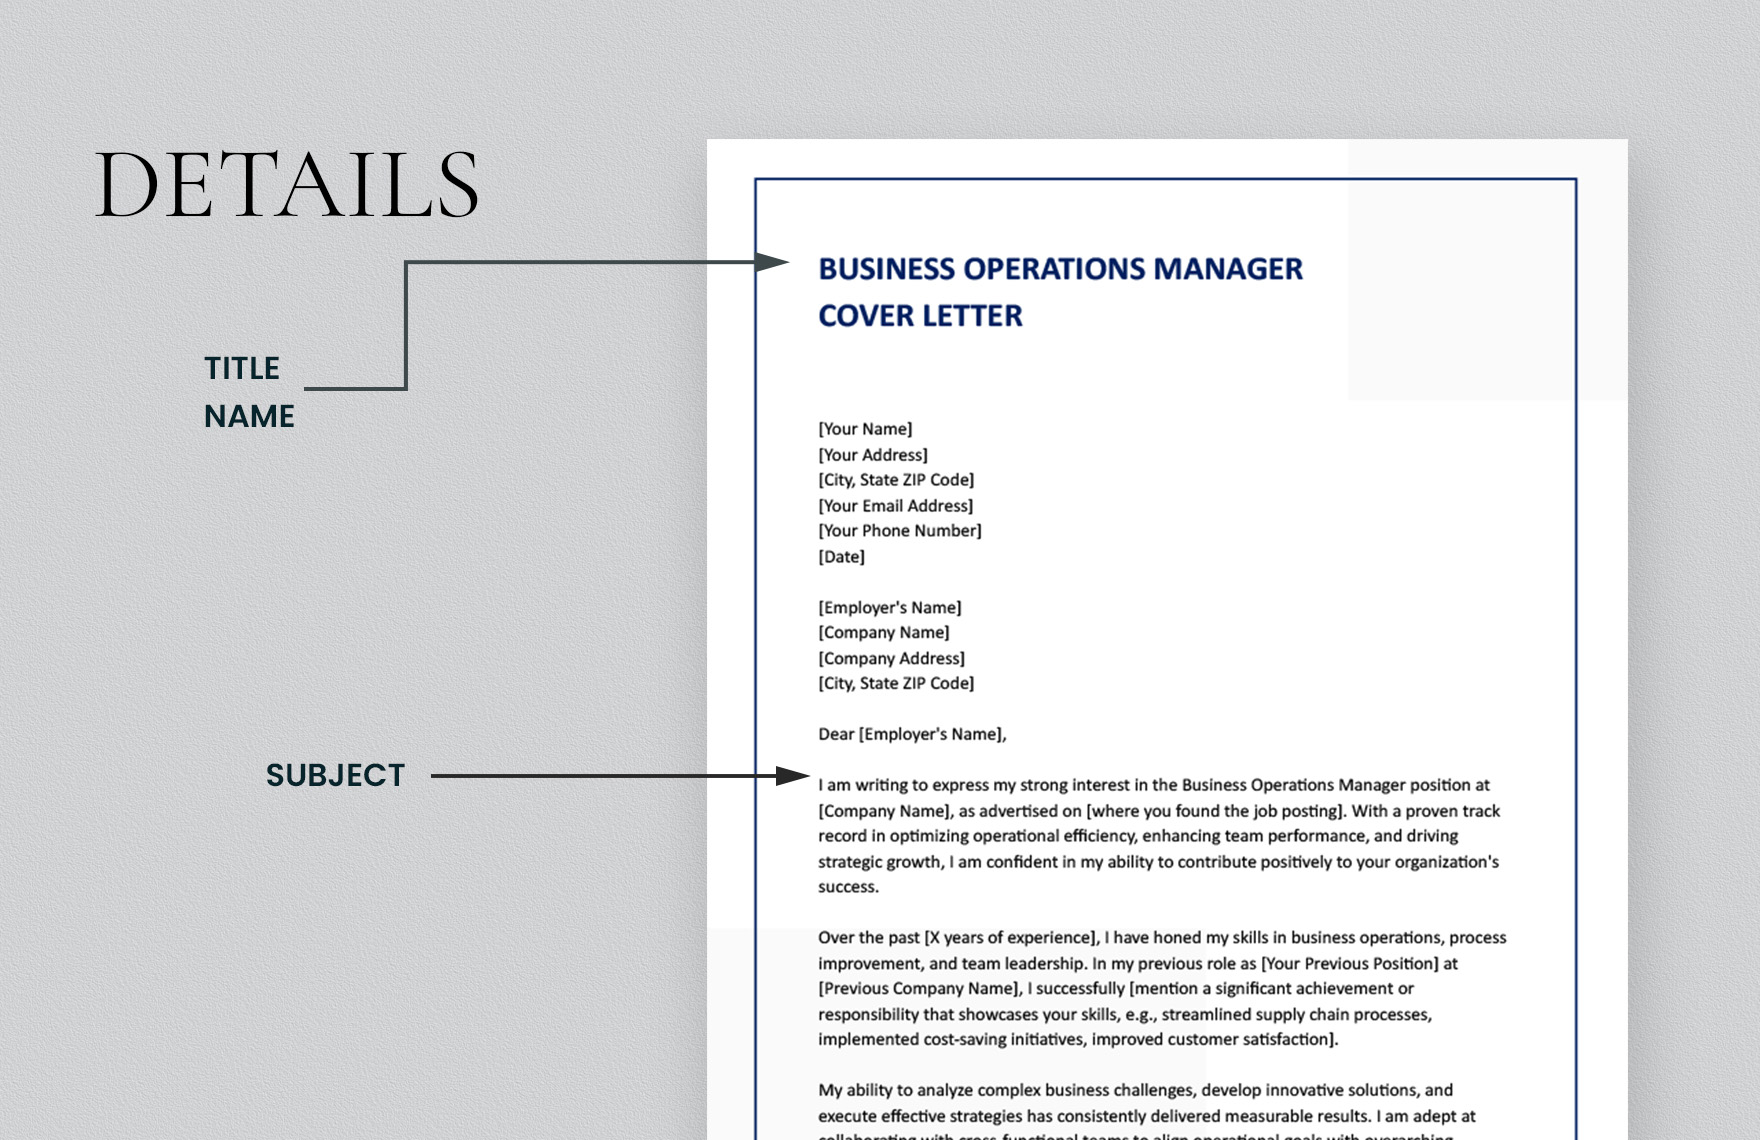 Business Operations Manager Cover Letter